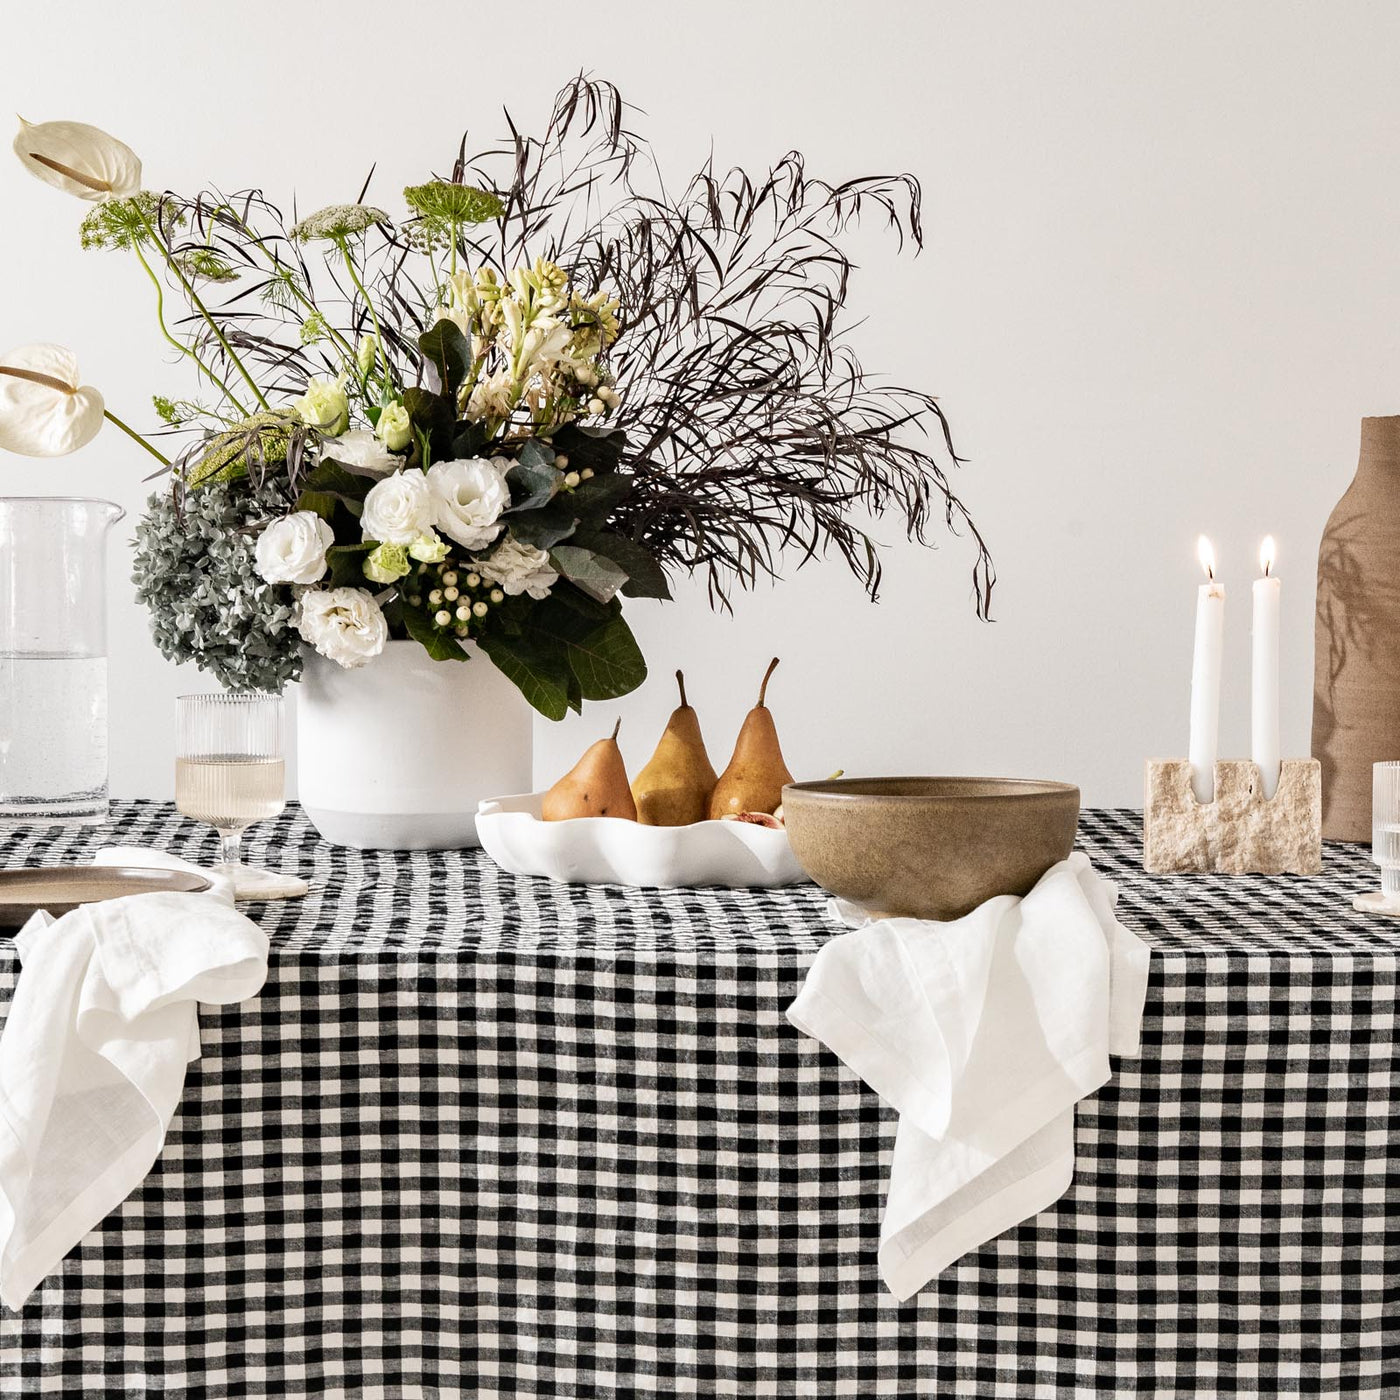 French Flax Linen Table Cloth in Charcoal Gingham